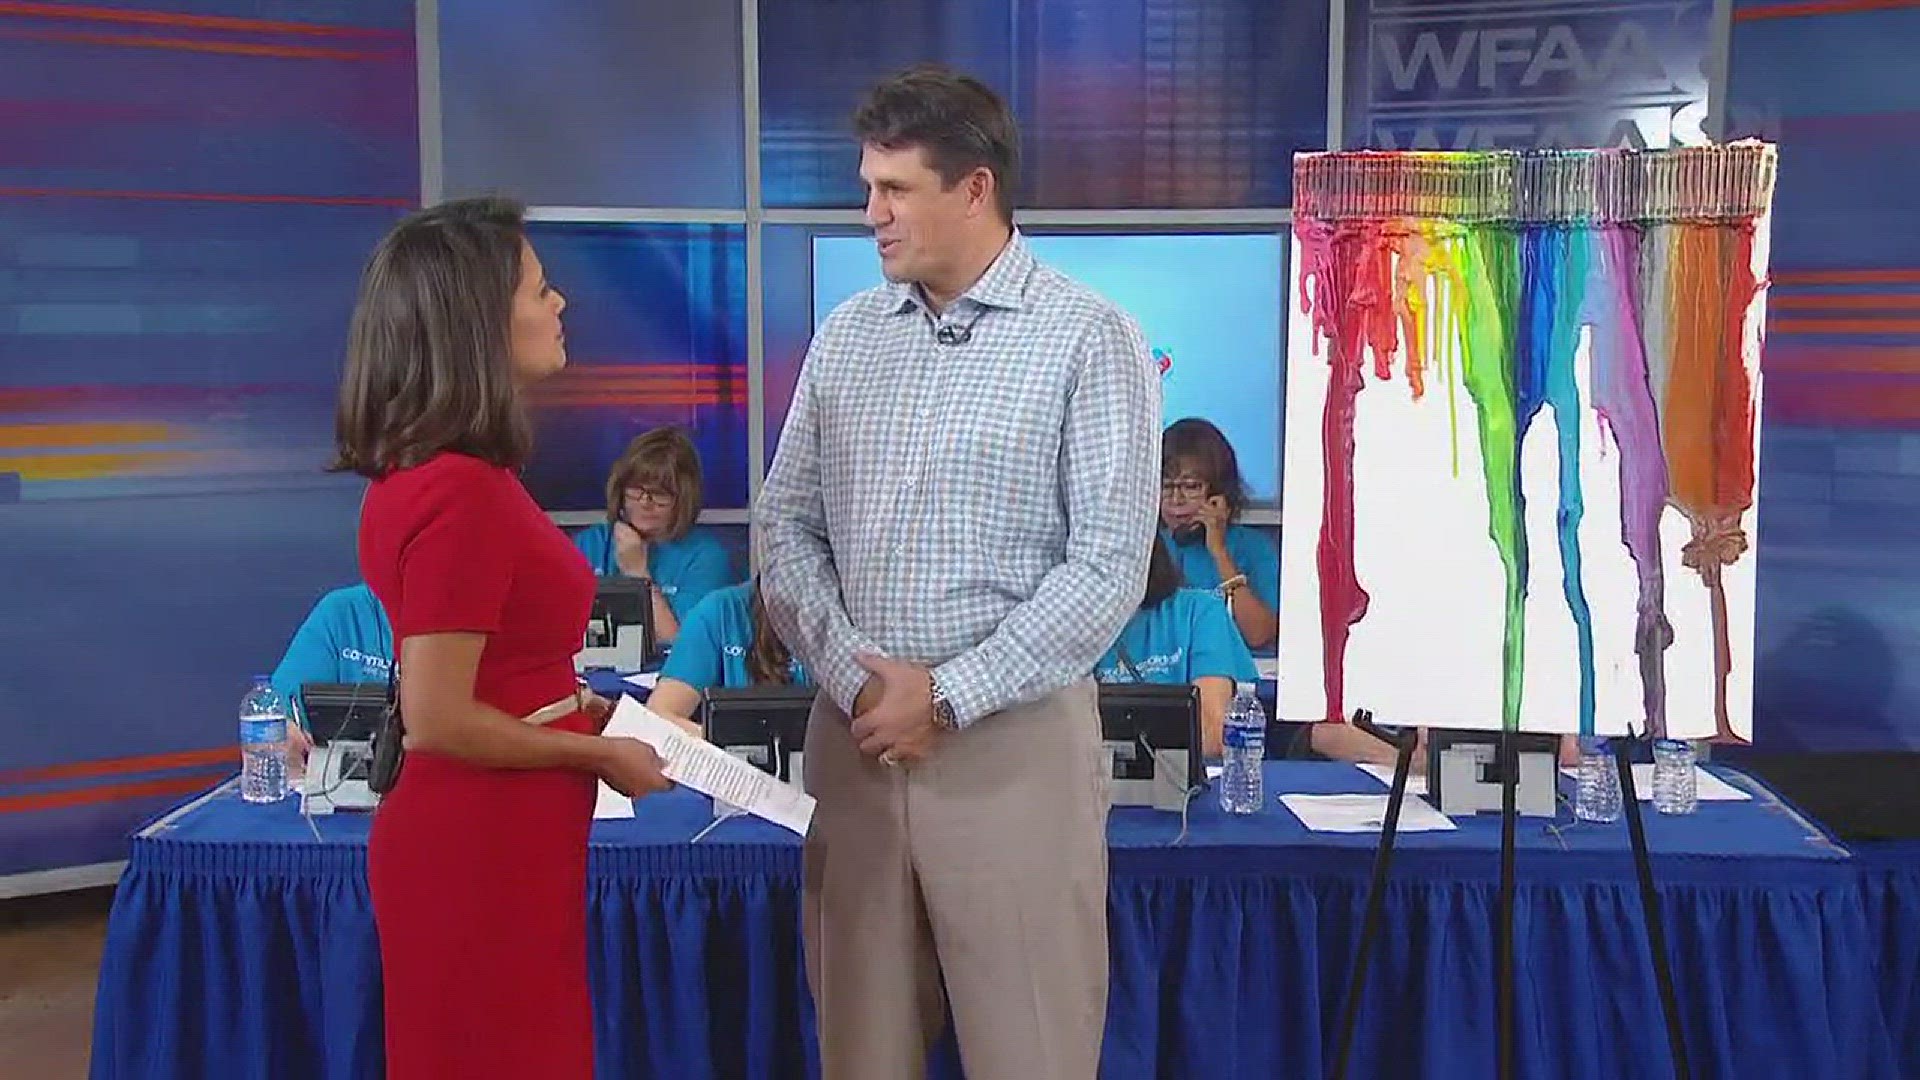 WFAA's crayon painting auctioned and sold Monday